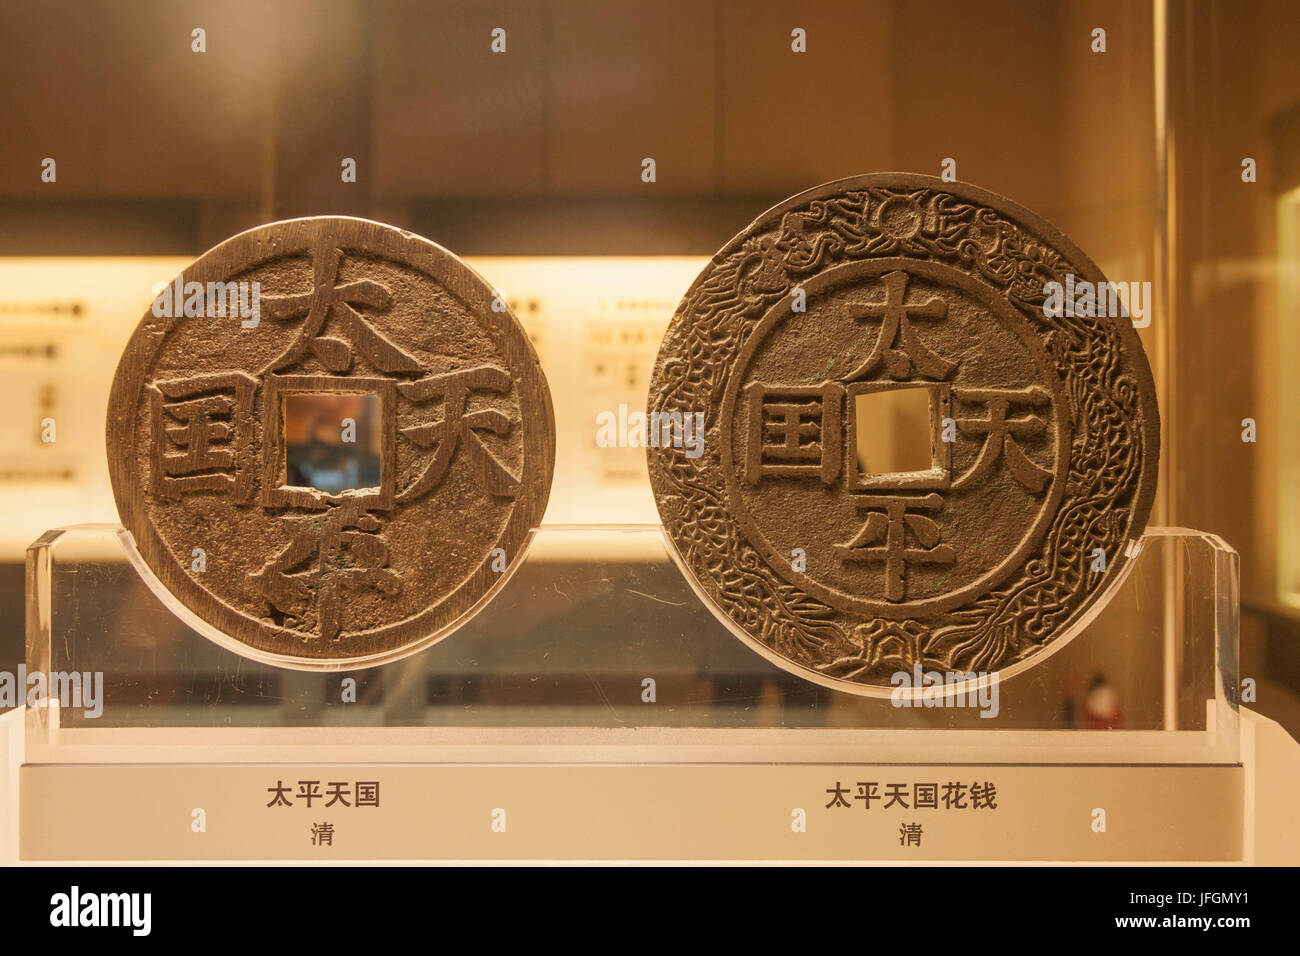 China, Shanghai, Shanghai Museum, Coins from the Qing Dynasty (1800s) Stock Photo